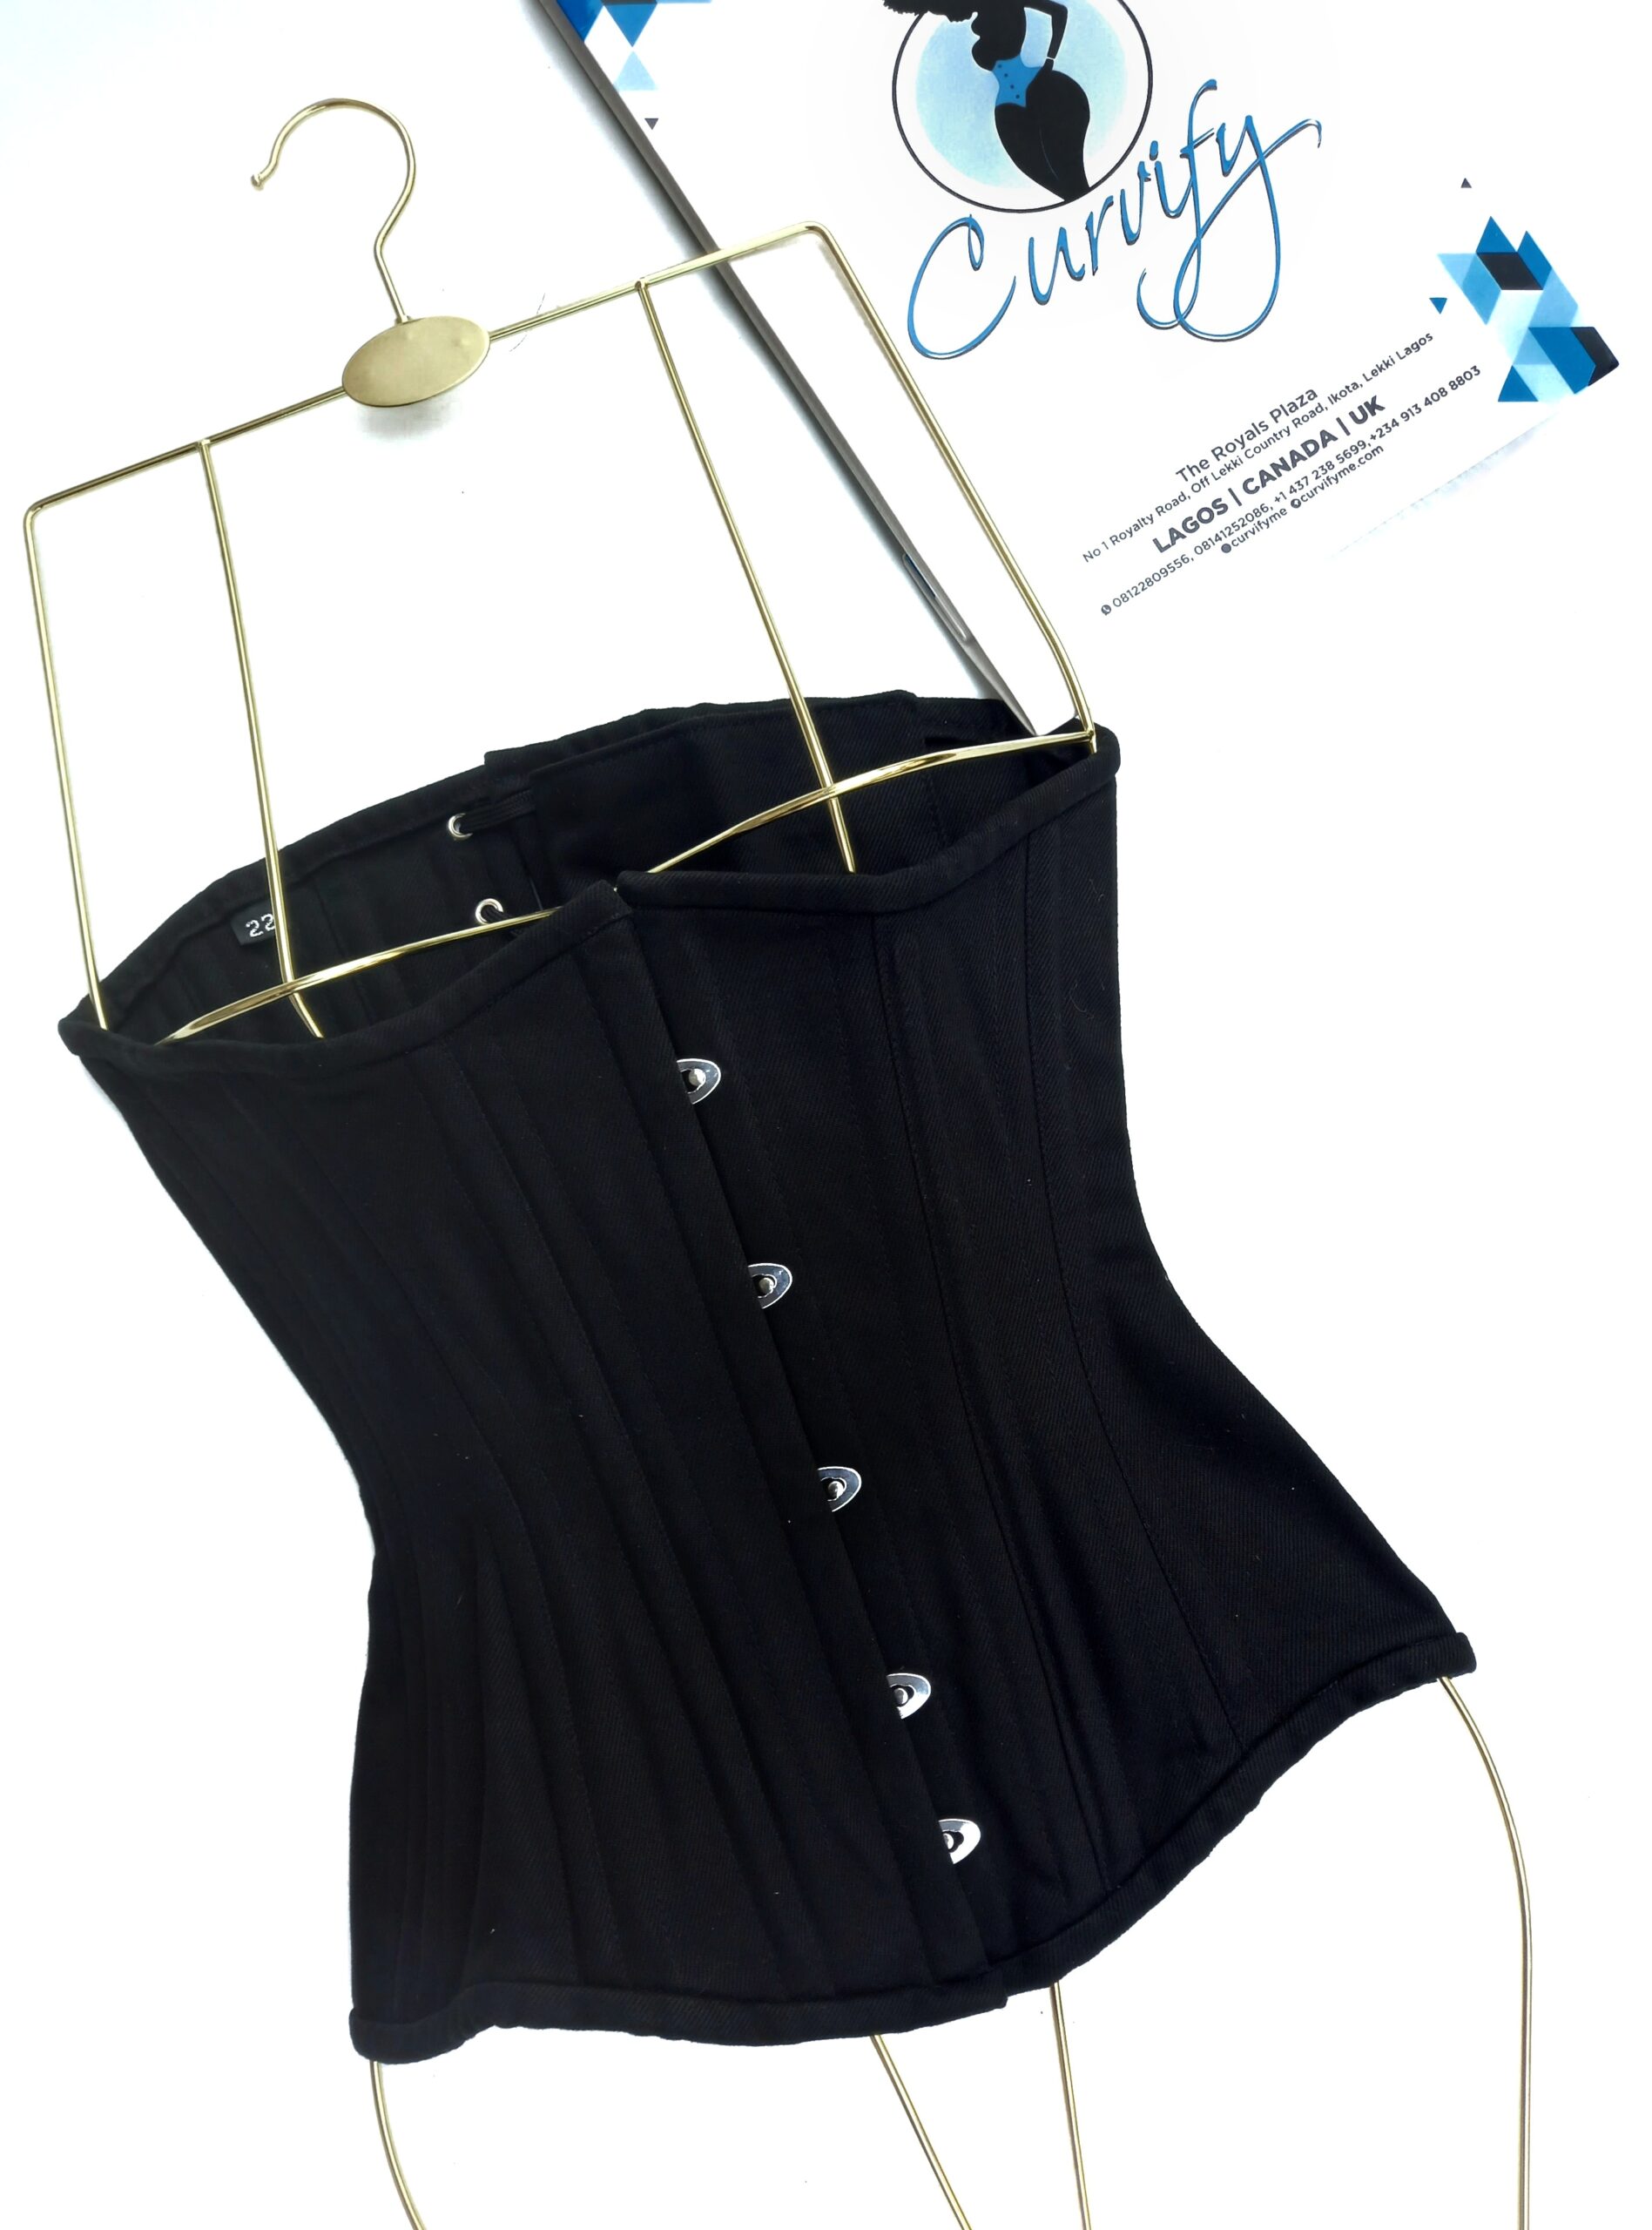 Flaunt Your Silhouette with our Corset Waist Trainer